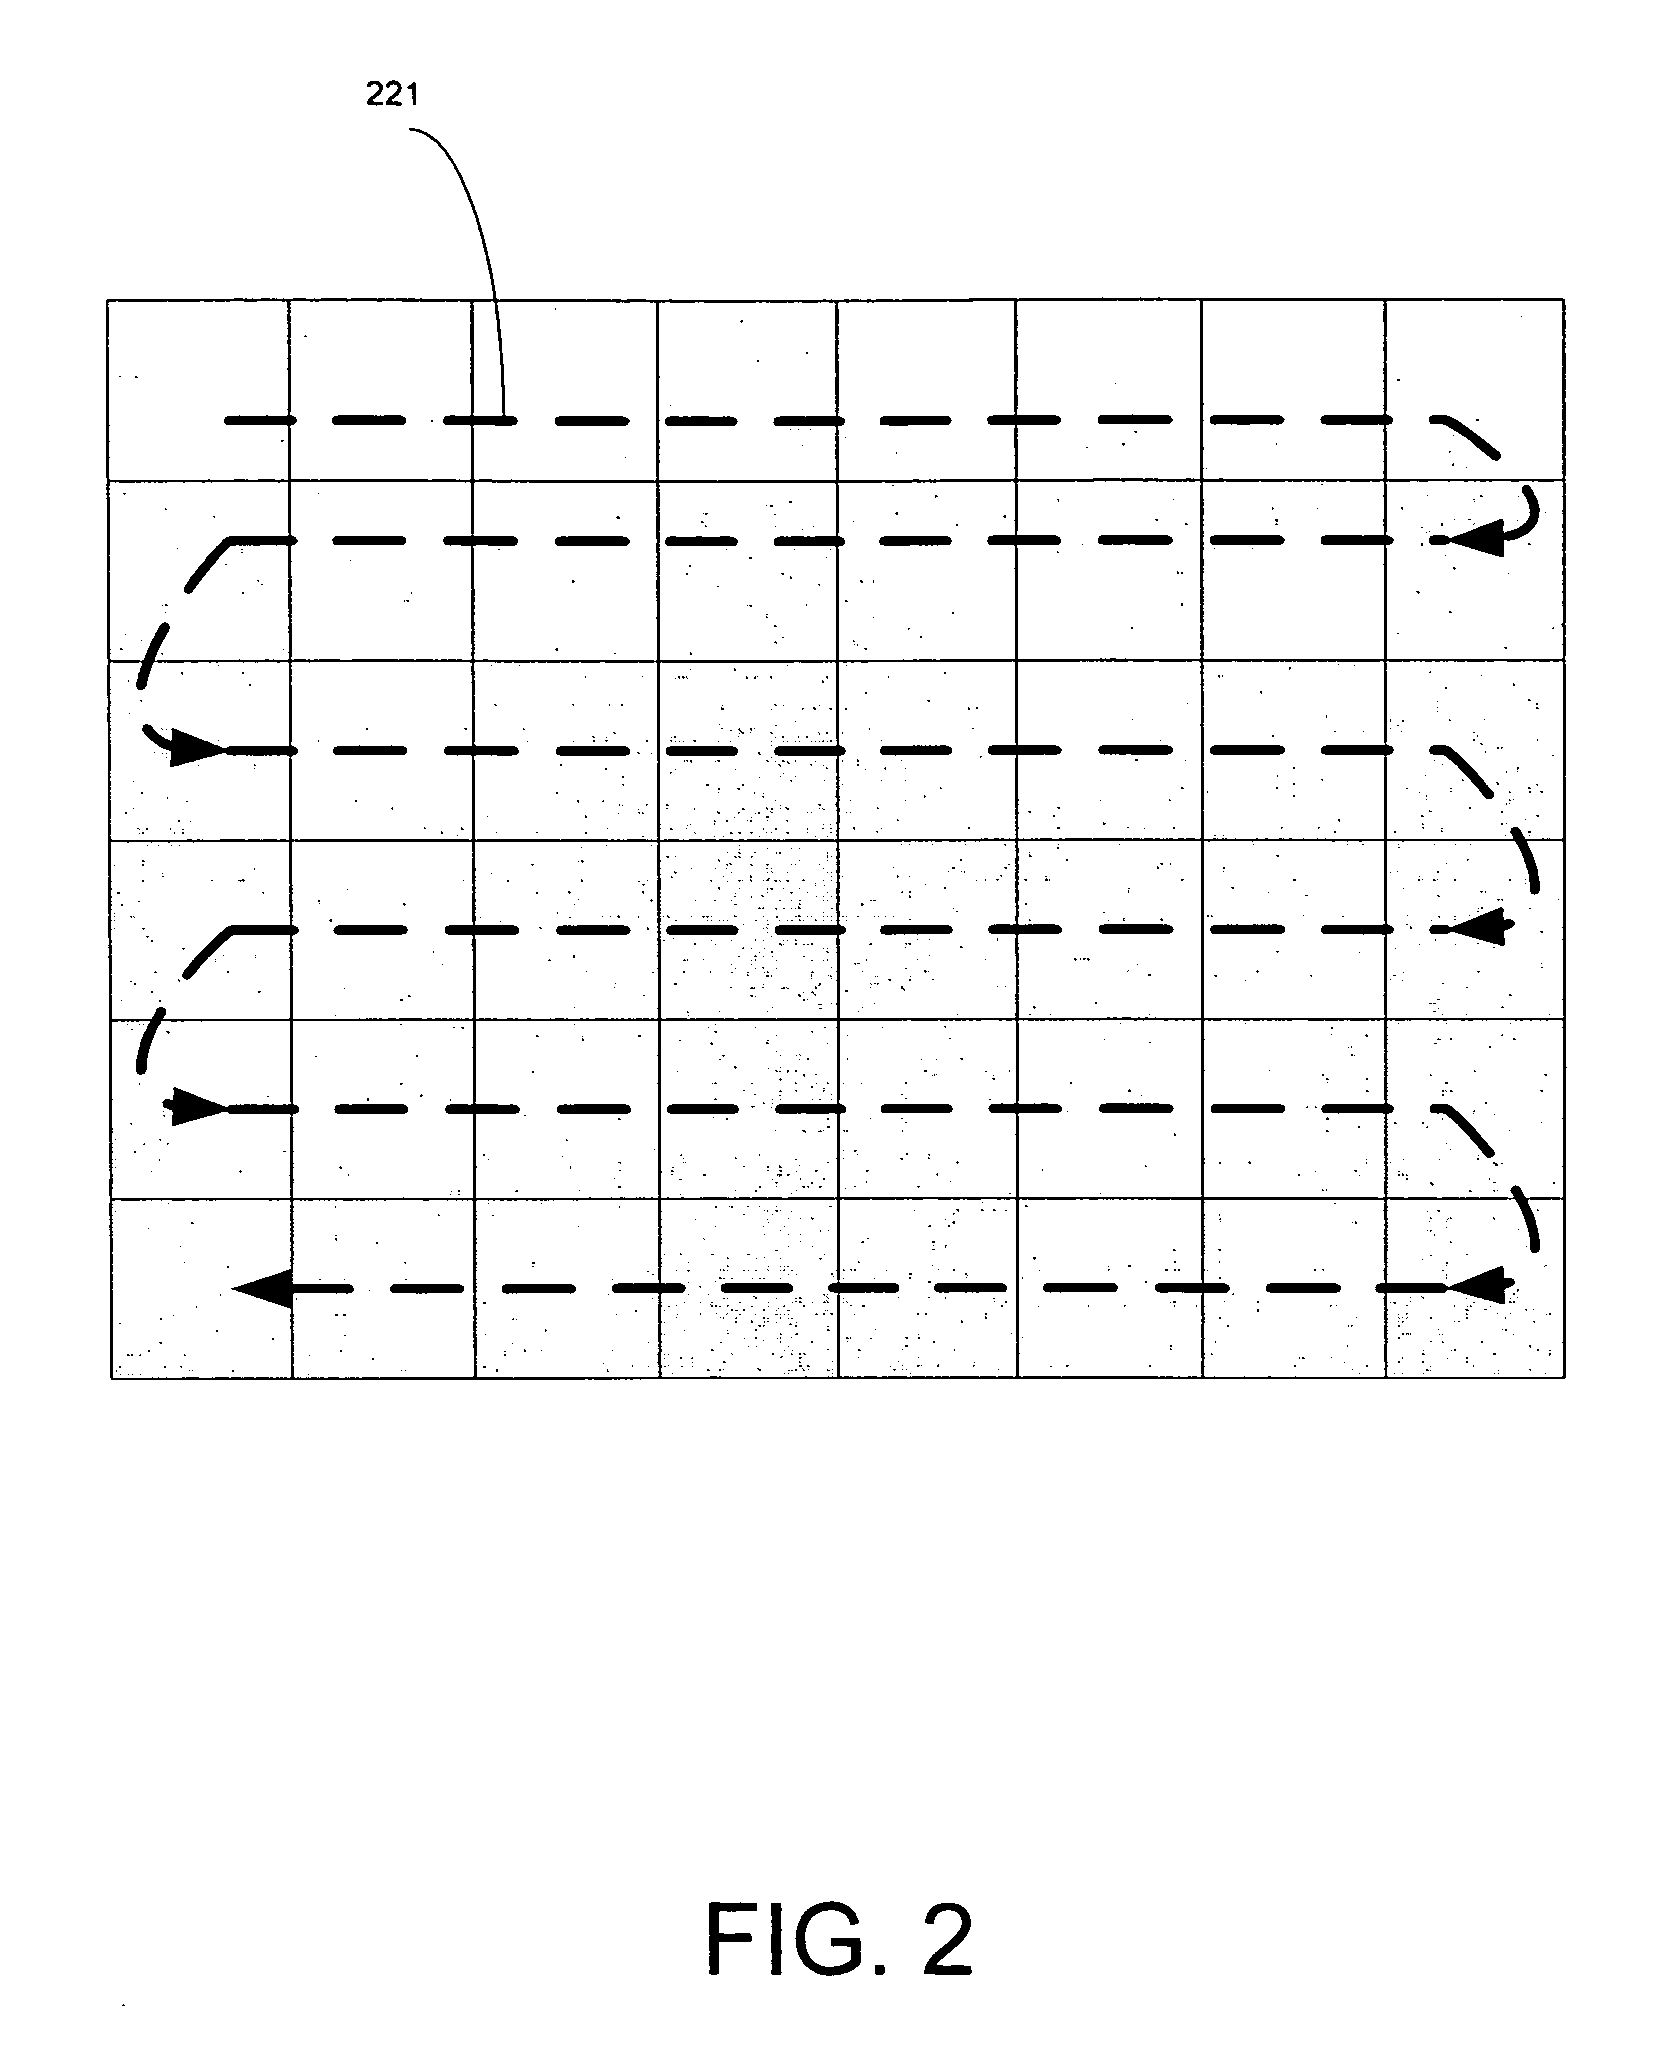 Method for rasterizing non-rectangular tile groups in a raster stage of a graphics pipeline